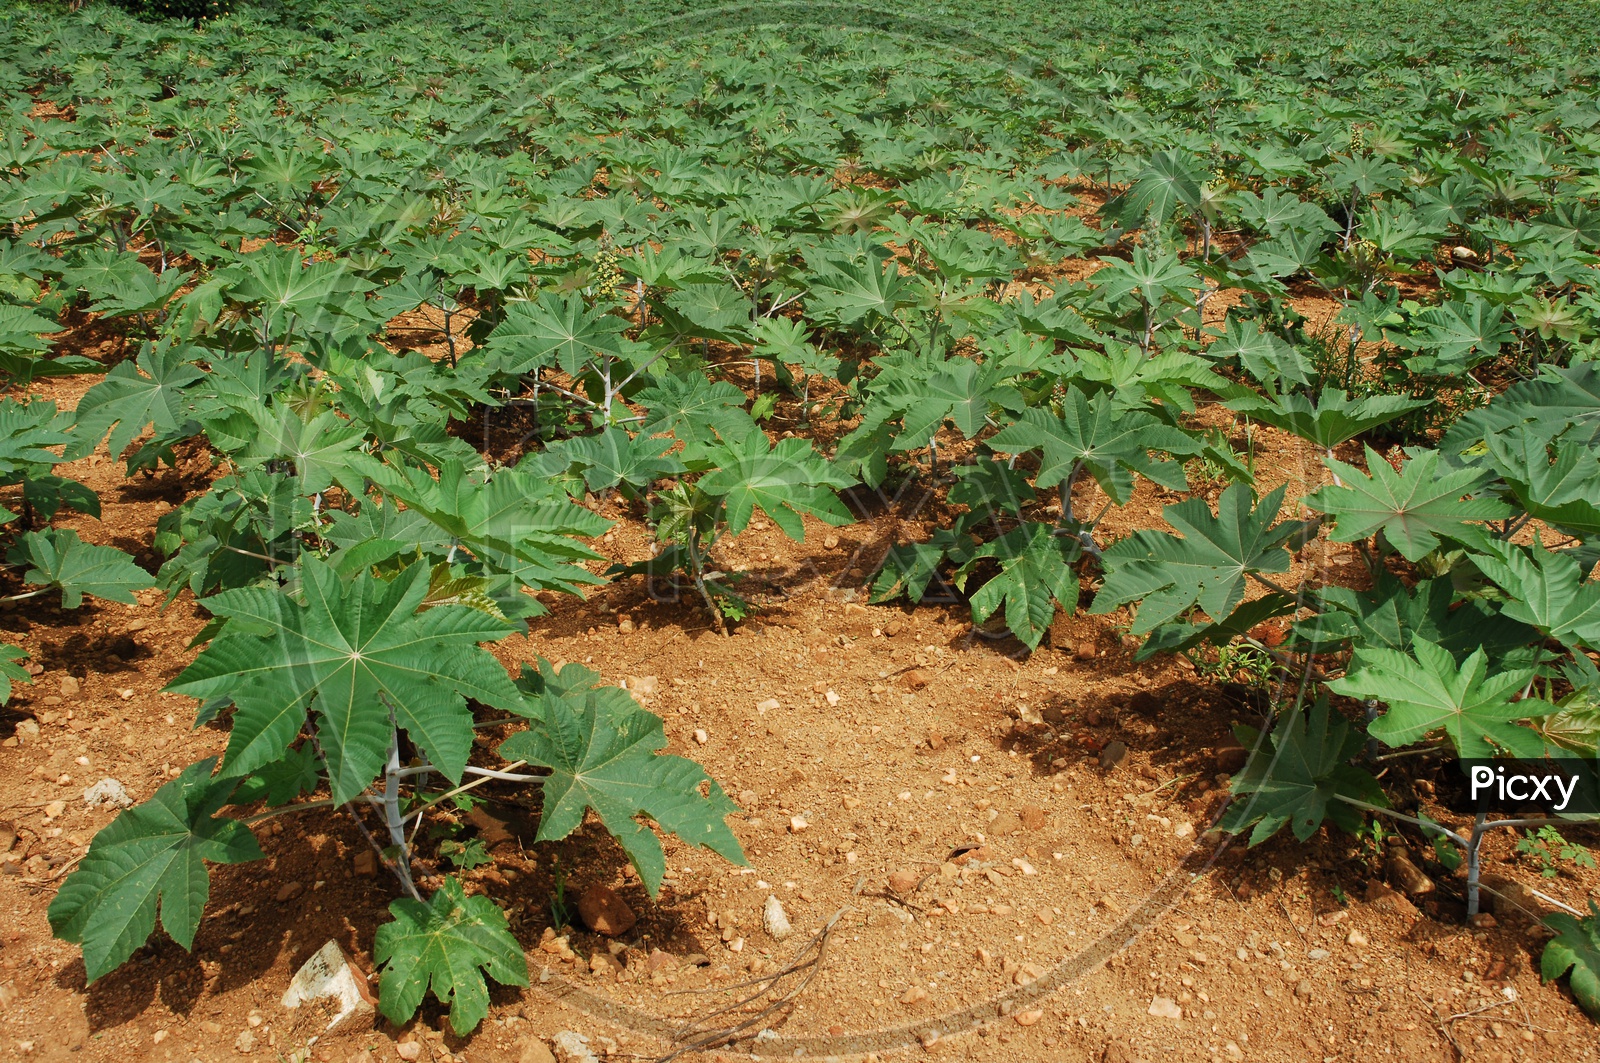 Elephant Foot Yam Or Greater Yam Plants in Farm